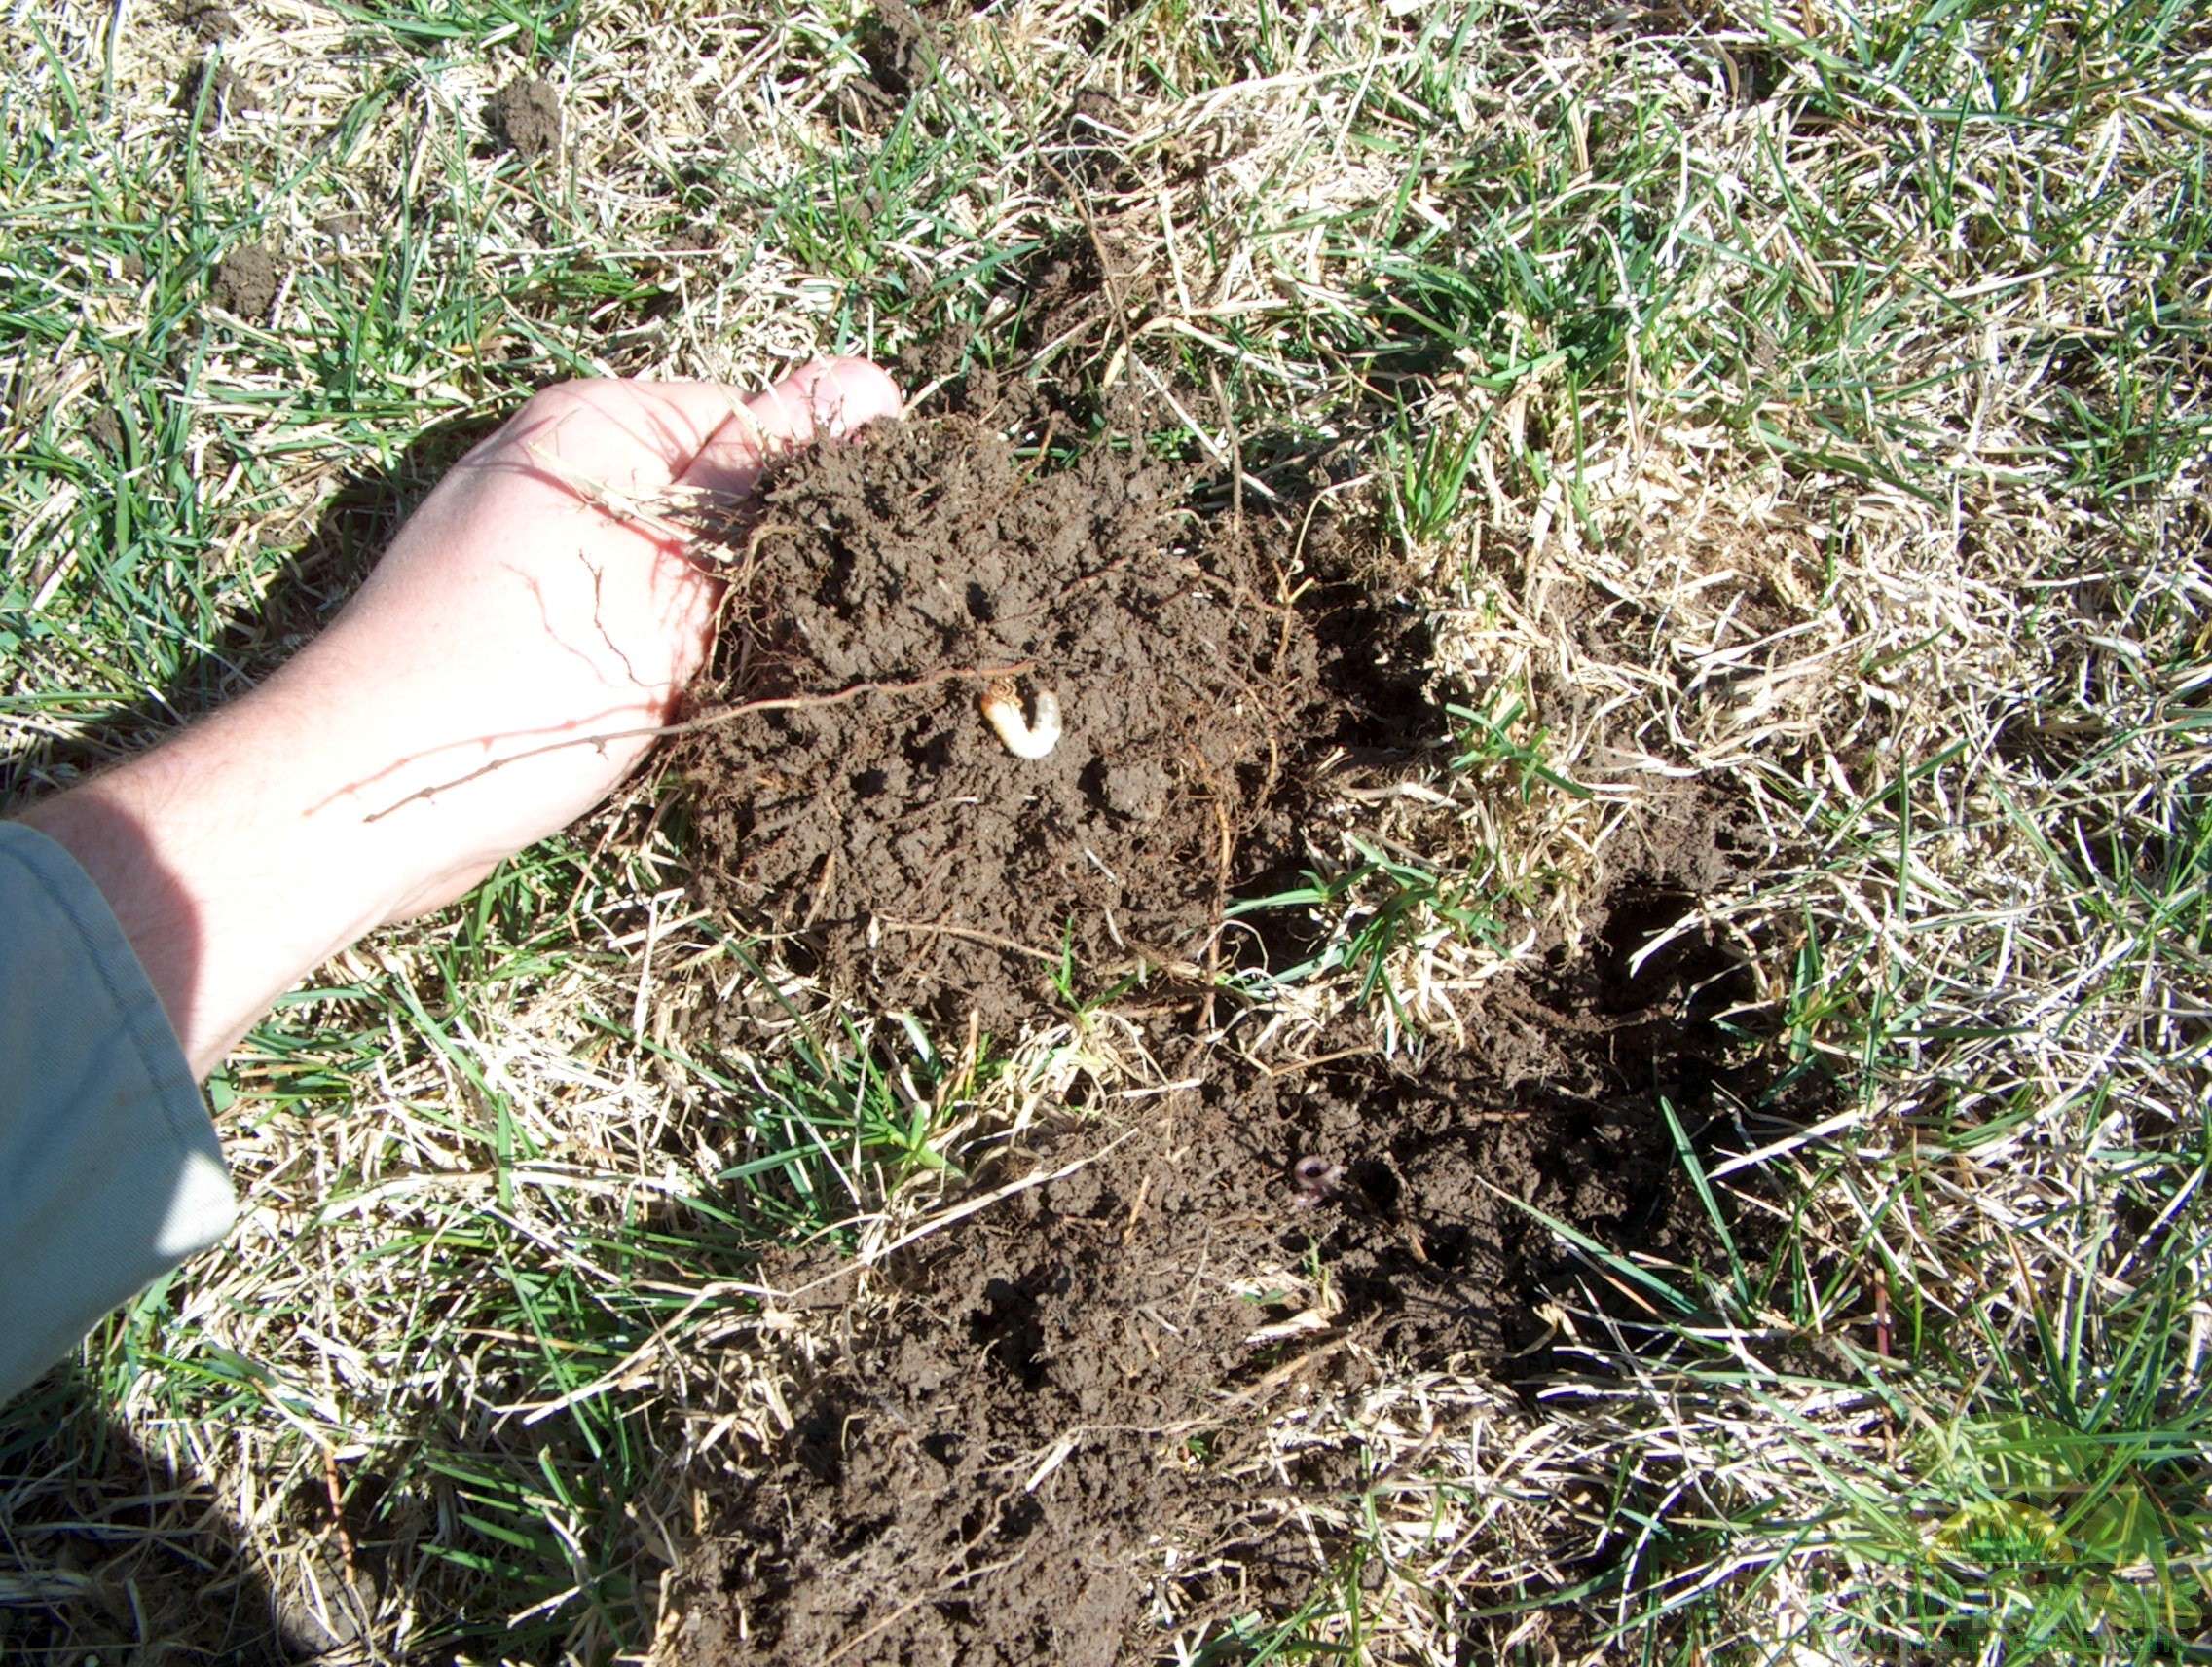 White Grubs in Your Lawn? How to Fix Lawn Damage From Grubs